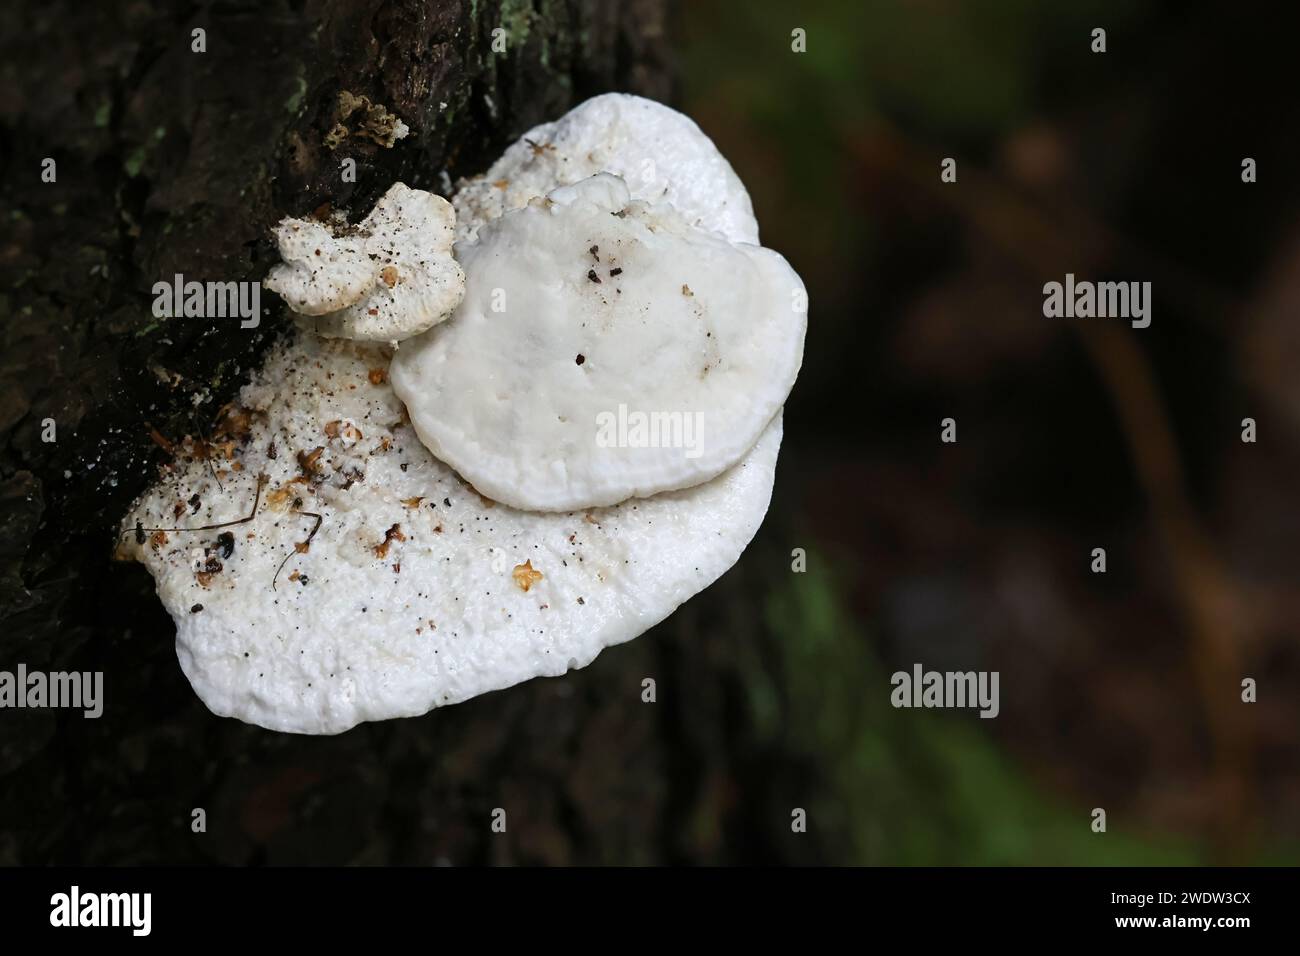 Postia stiptica, commonly known as bitter bracket fungus, wild polypore from Finland Stock Photo